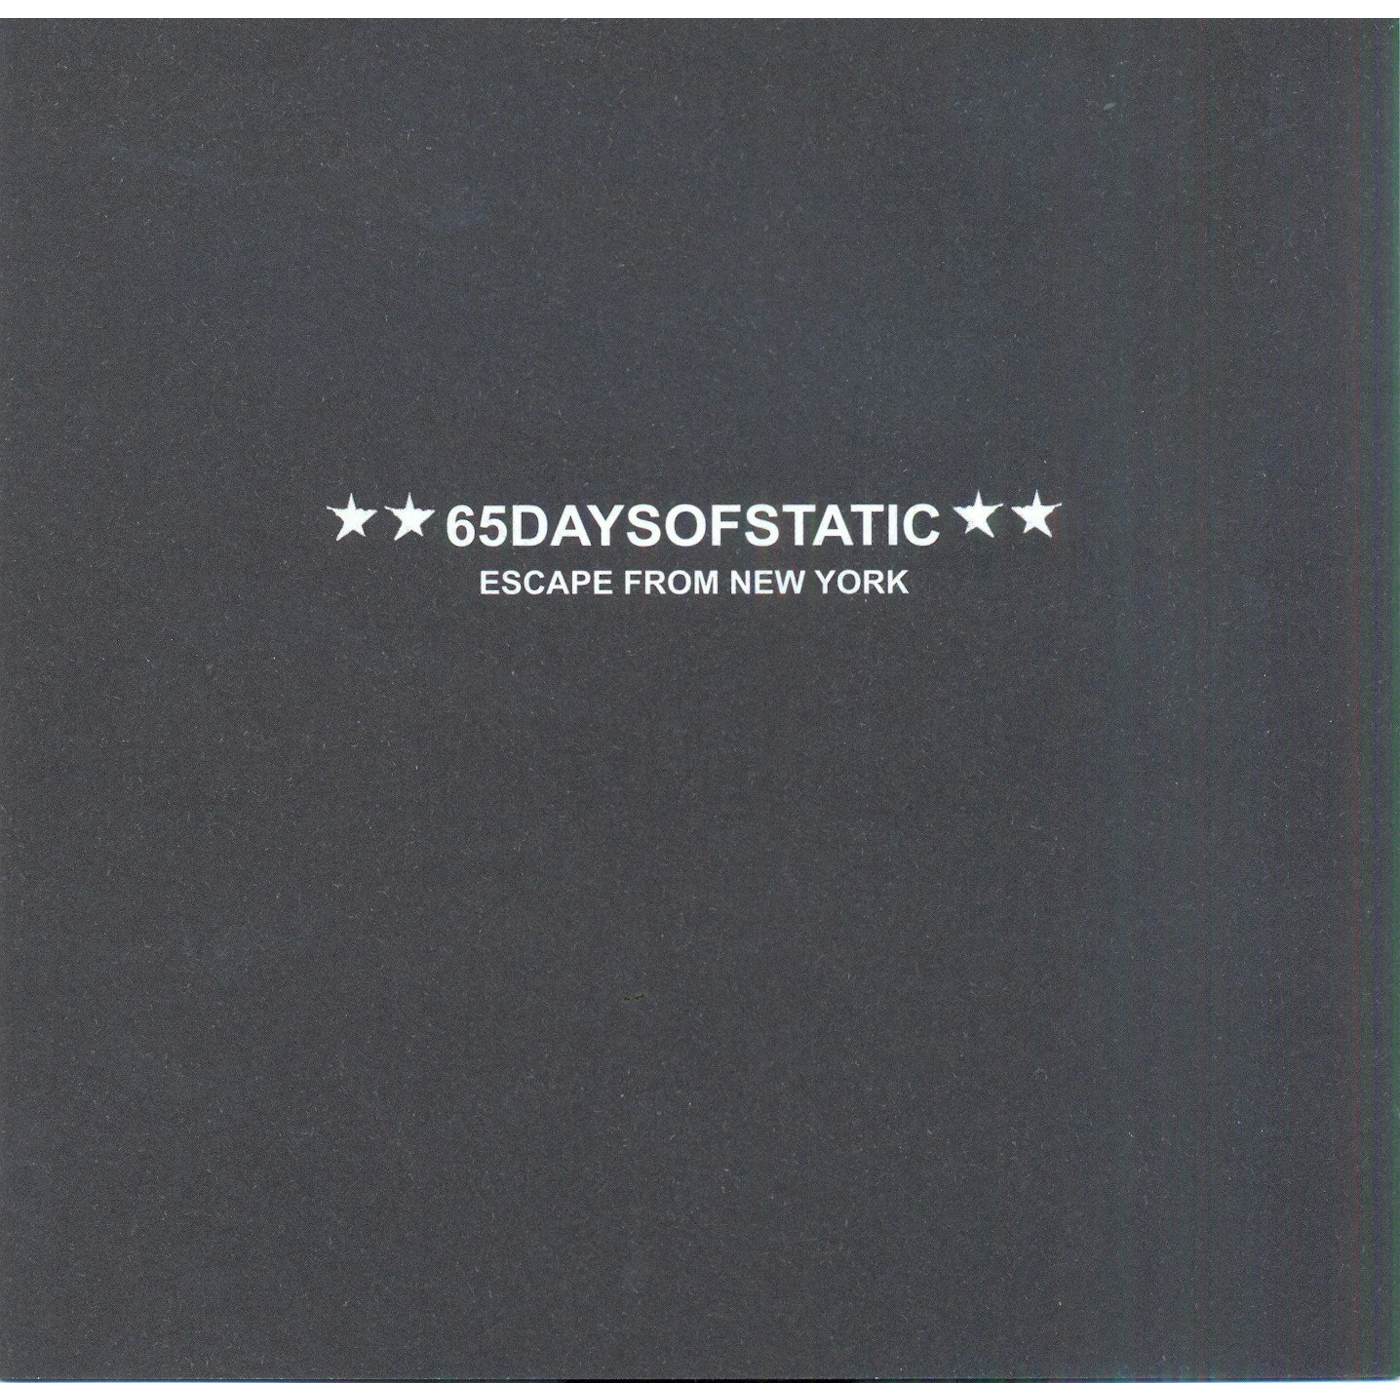 65daysofstatic 'Escape From New York'